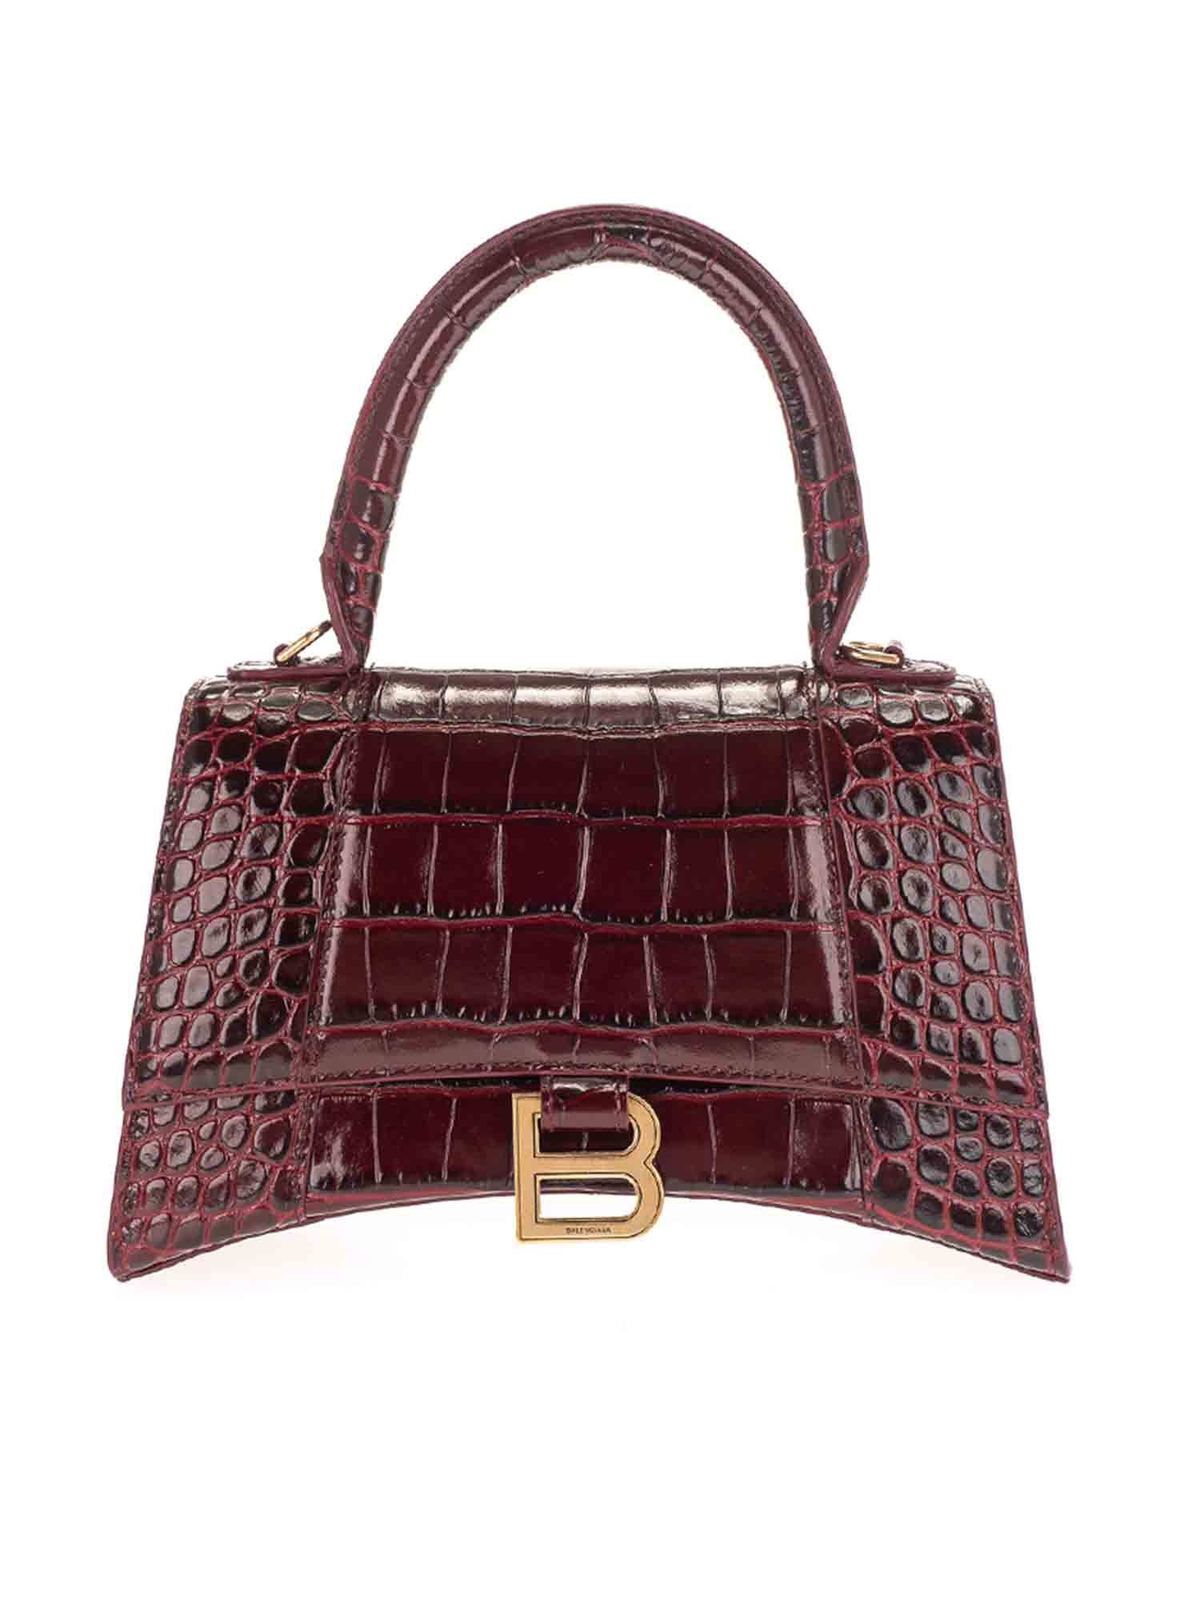 Balenciaga Hourglass S Top Handle Bag In Burgundy In Red